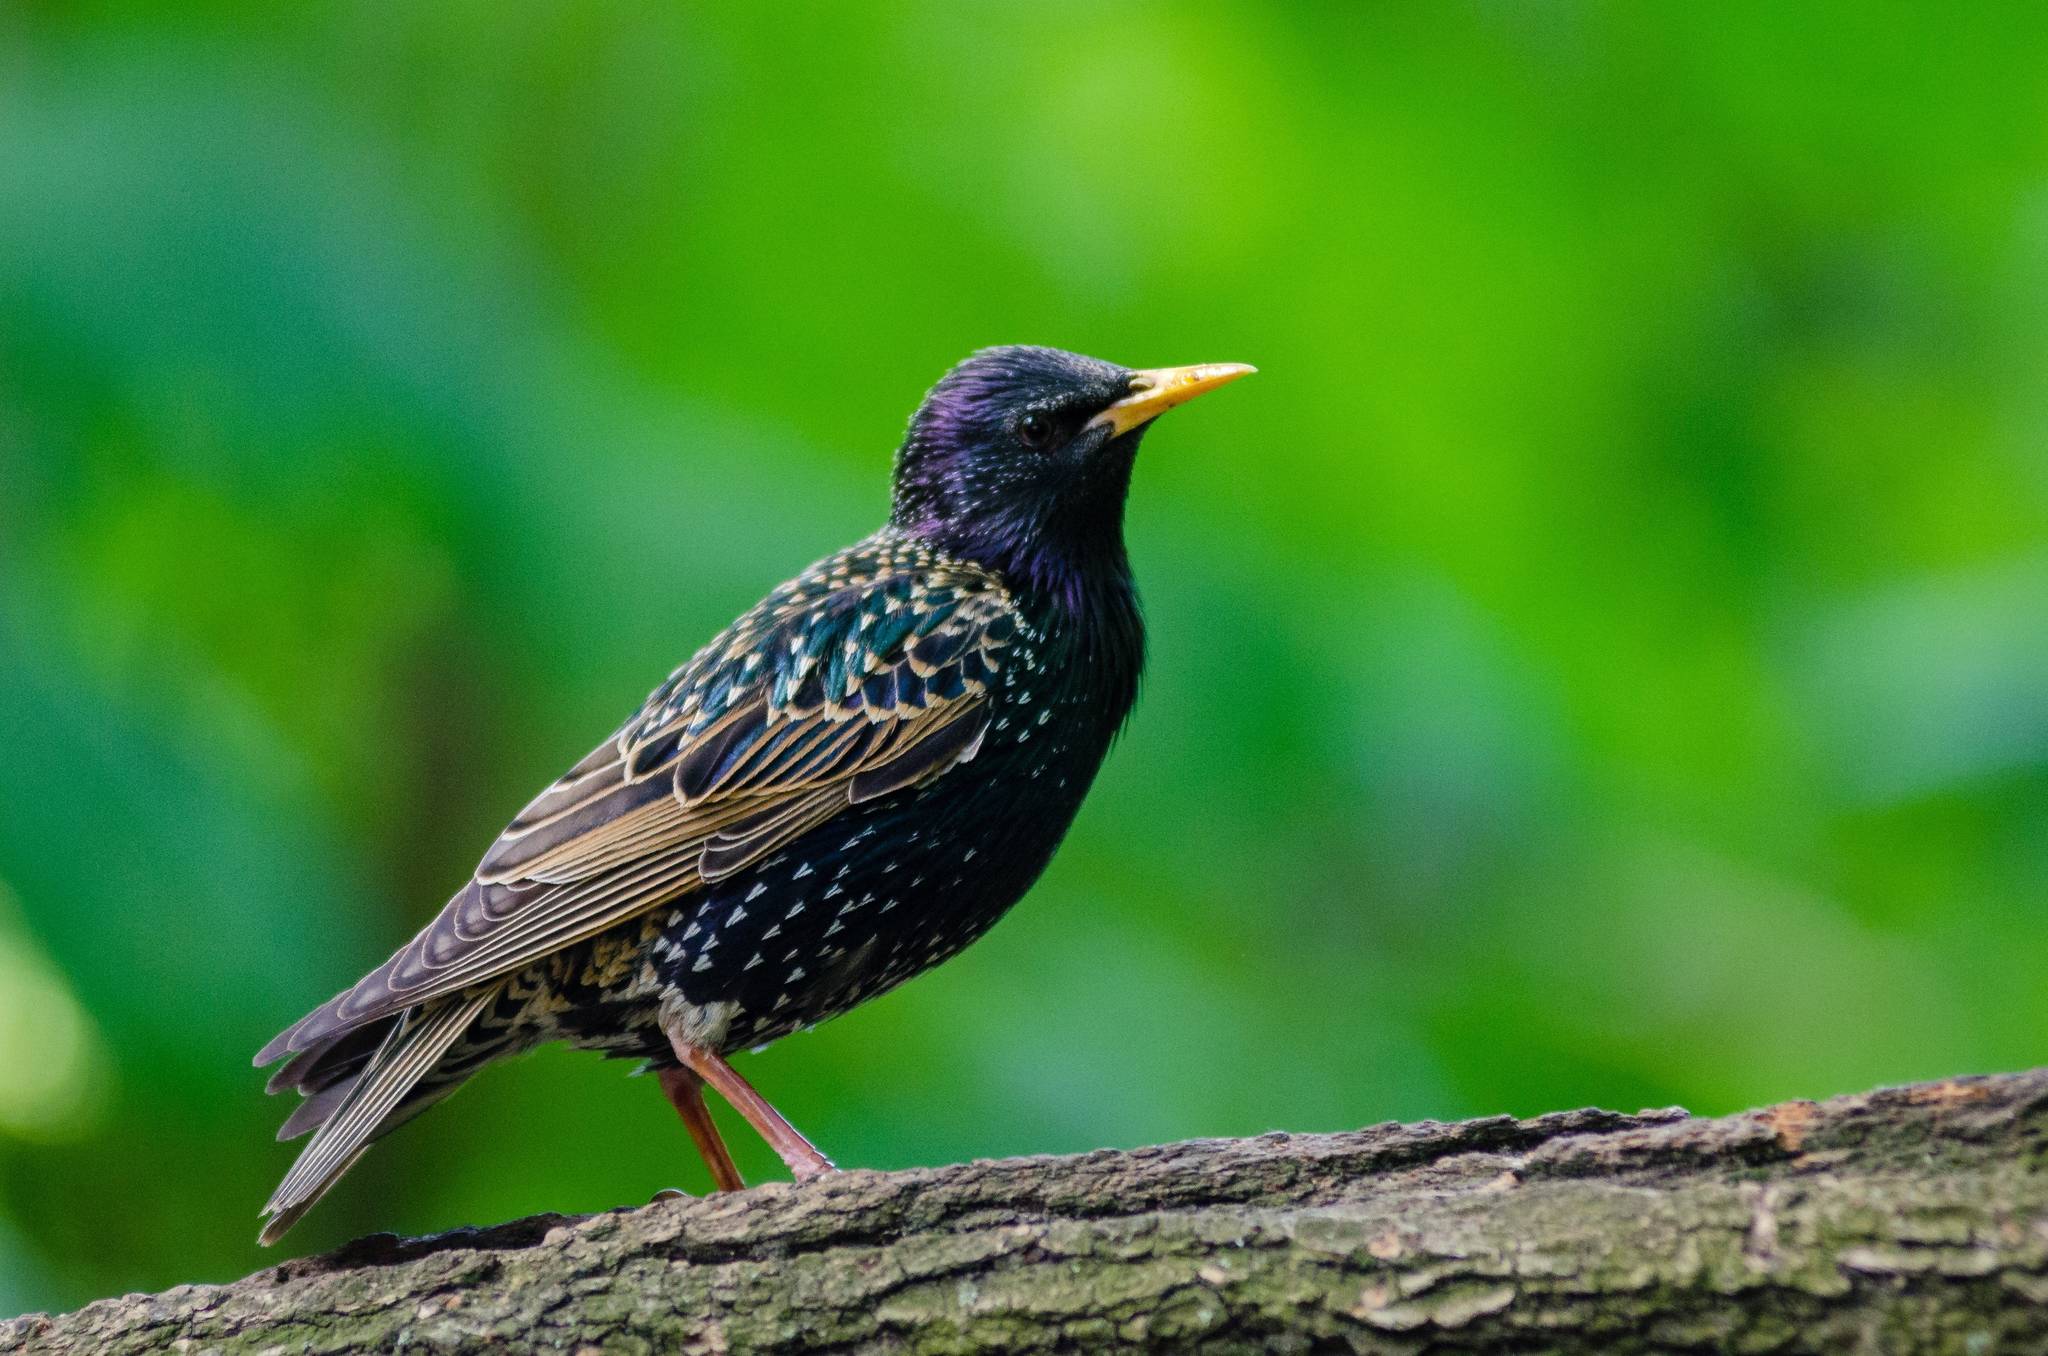 Starlings, like the one shown in this photo, are among the birds known to mimic the songs of other species. (Pixabay)